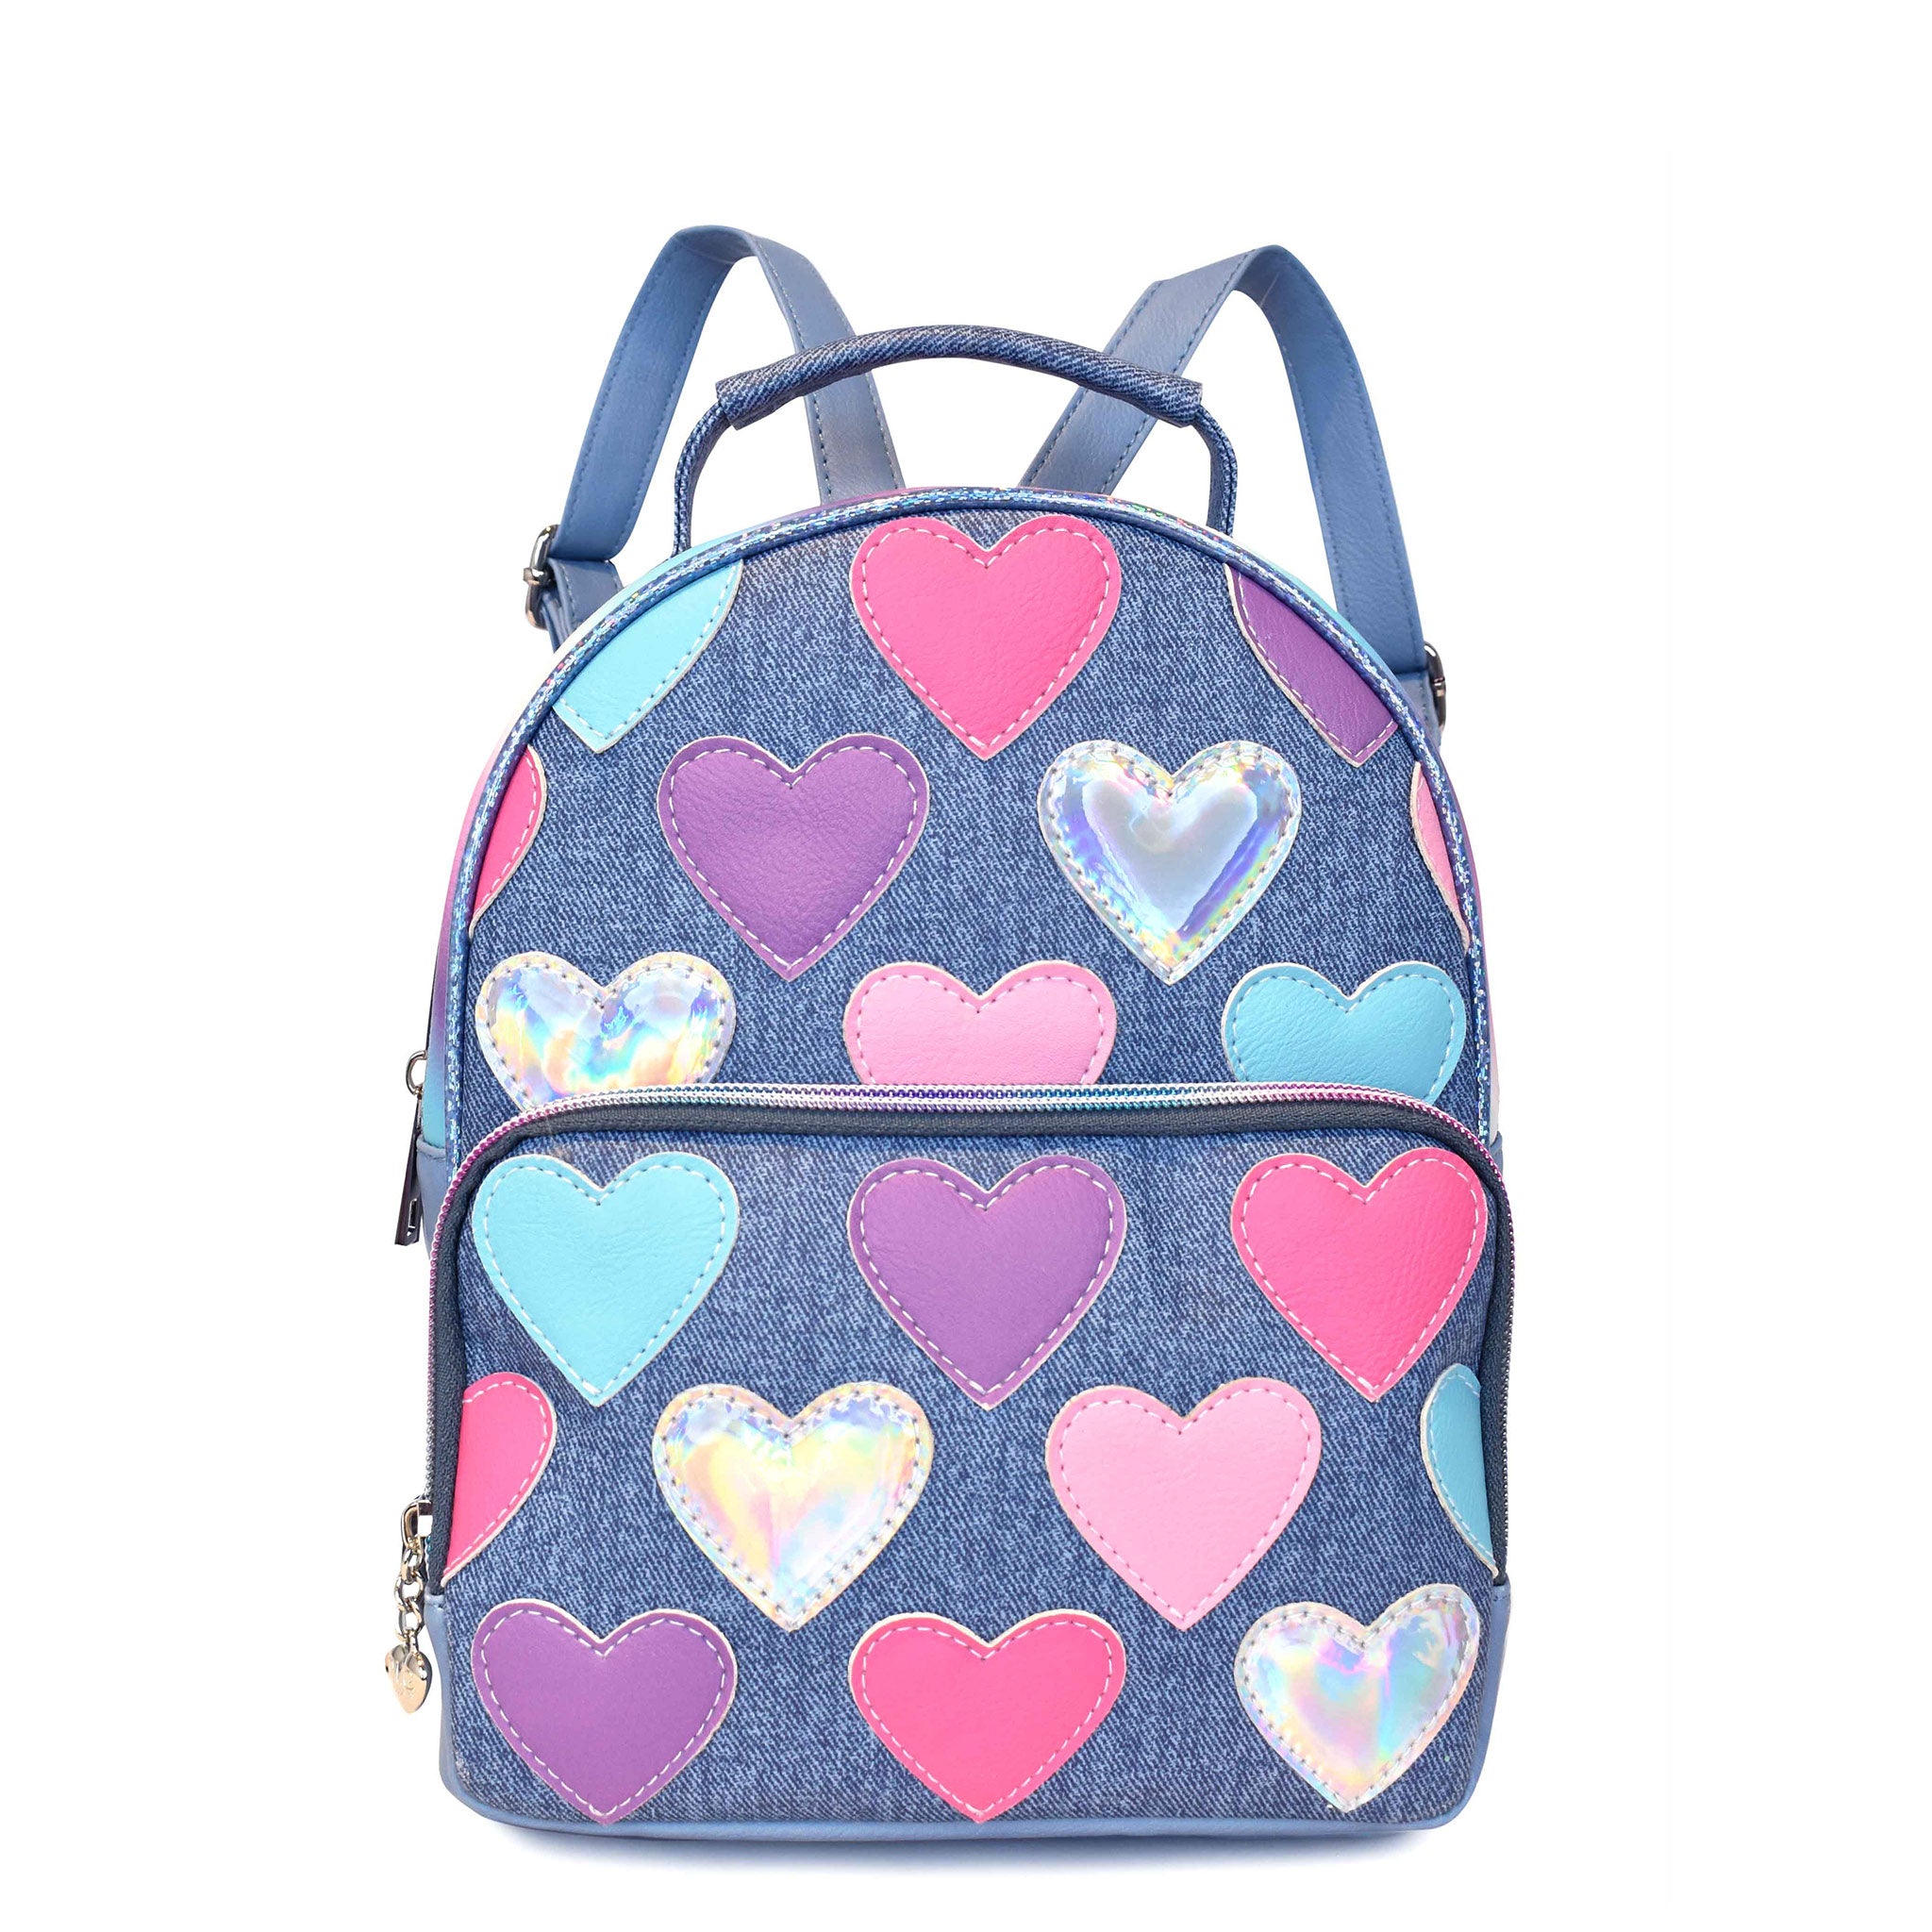 Front view of a denim mini backpack covered in heart patches with a front zipper pocket and top handle